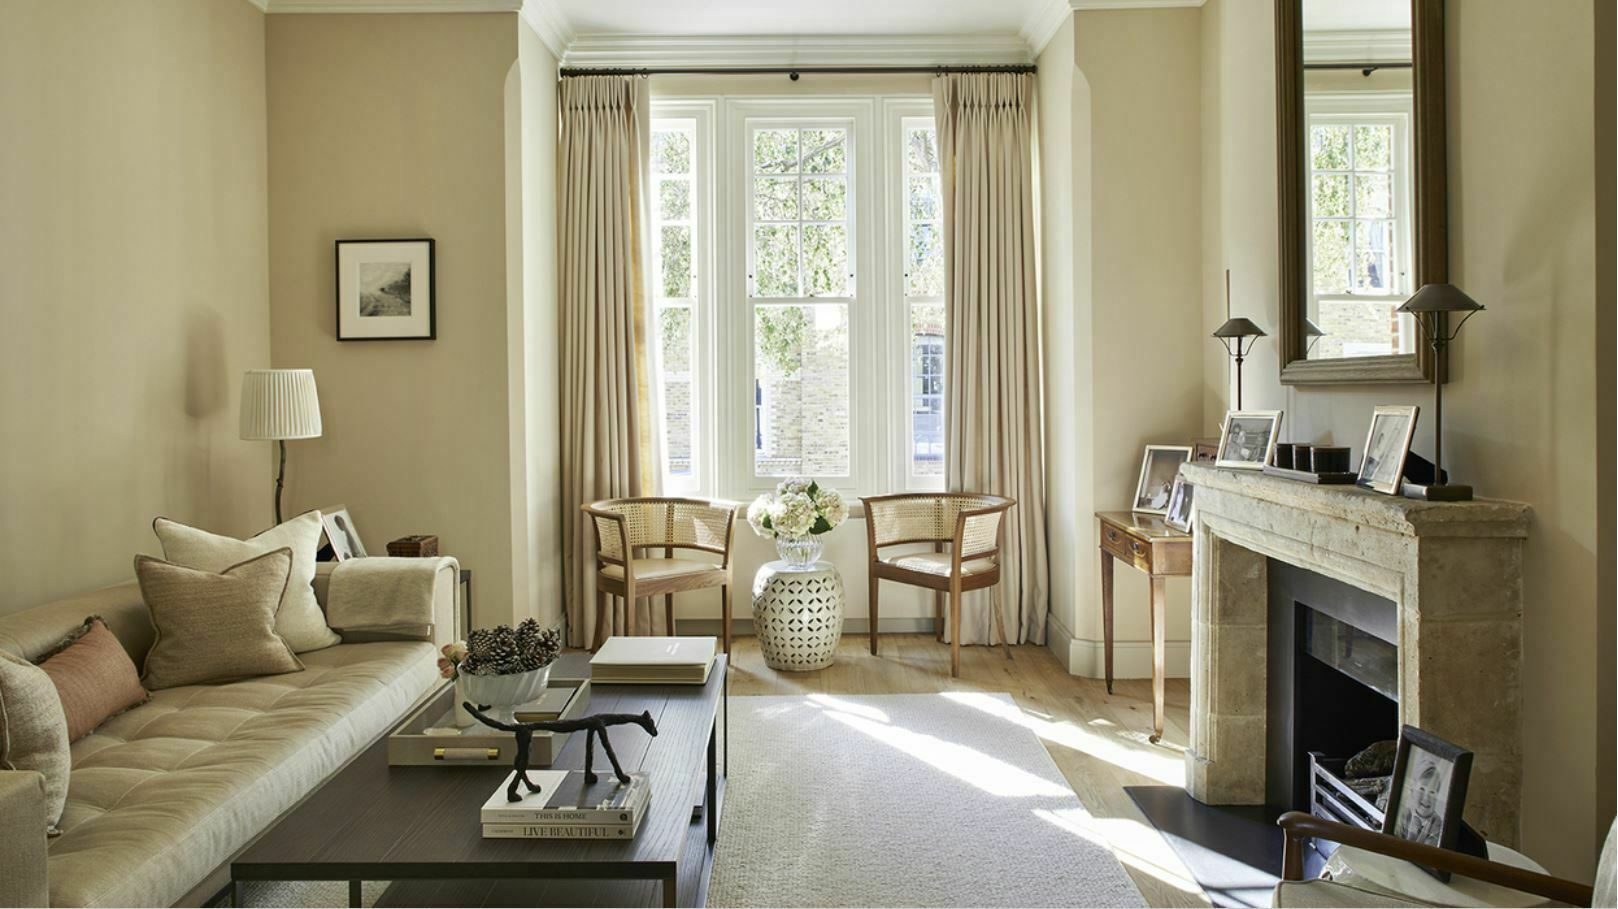 Get exclusive interior advice in our free series